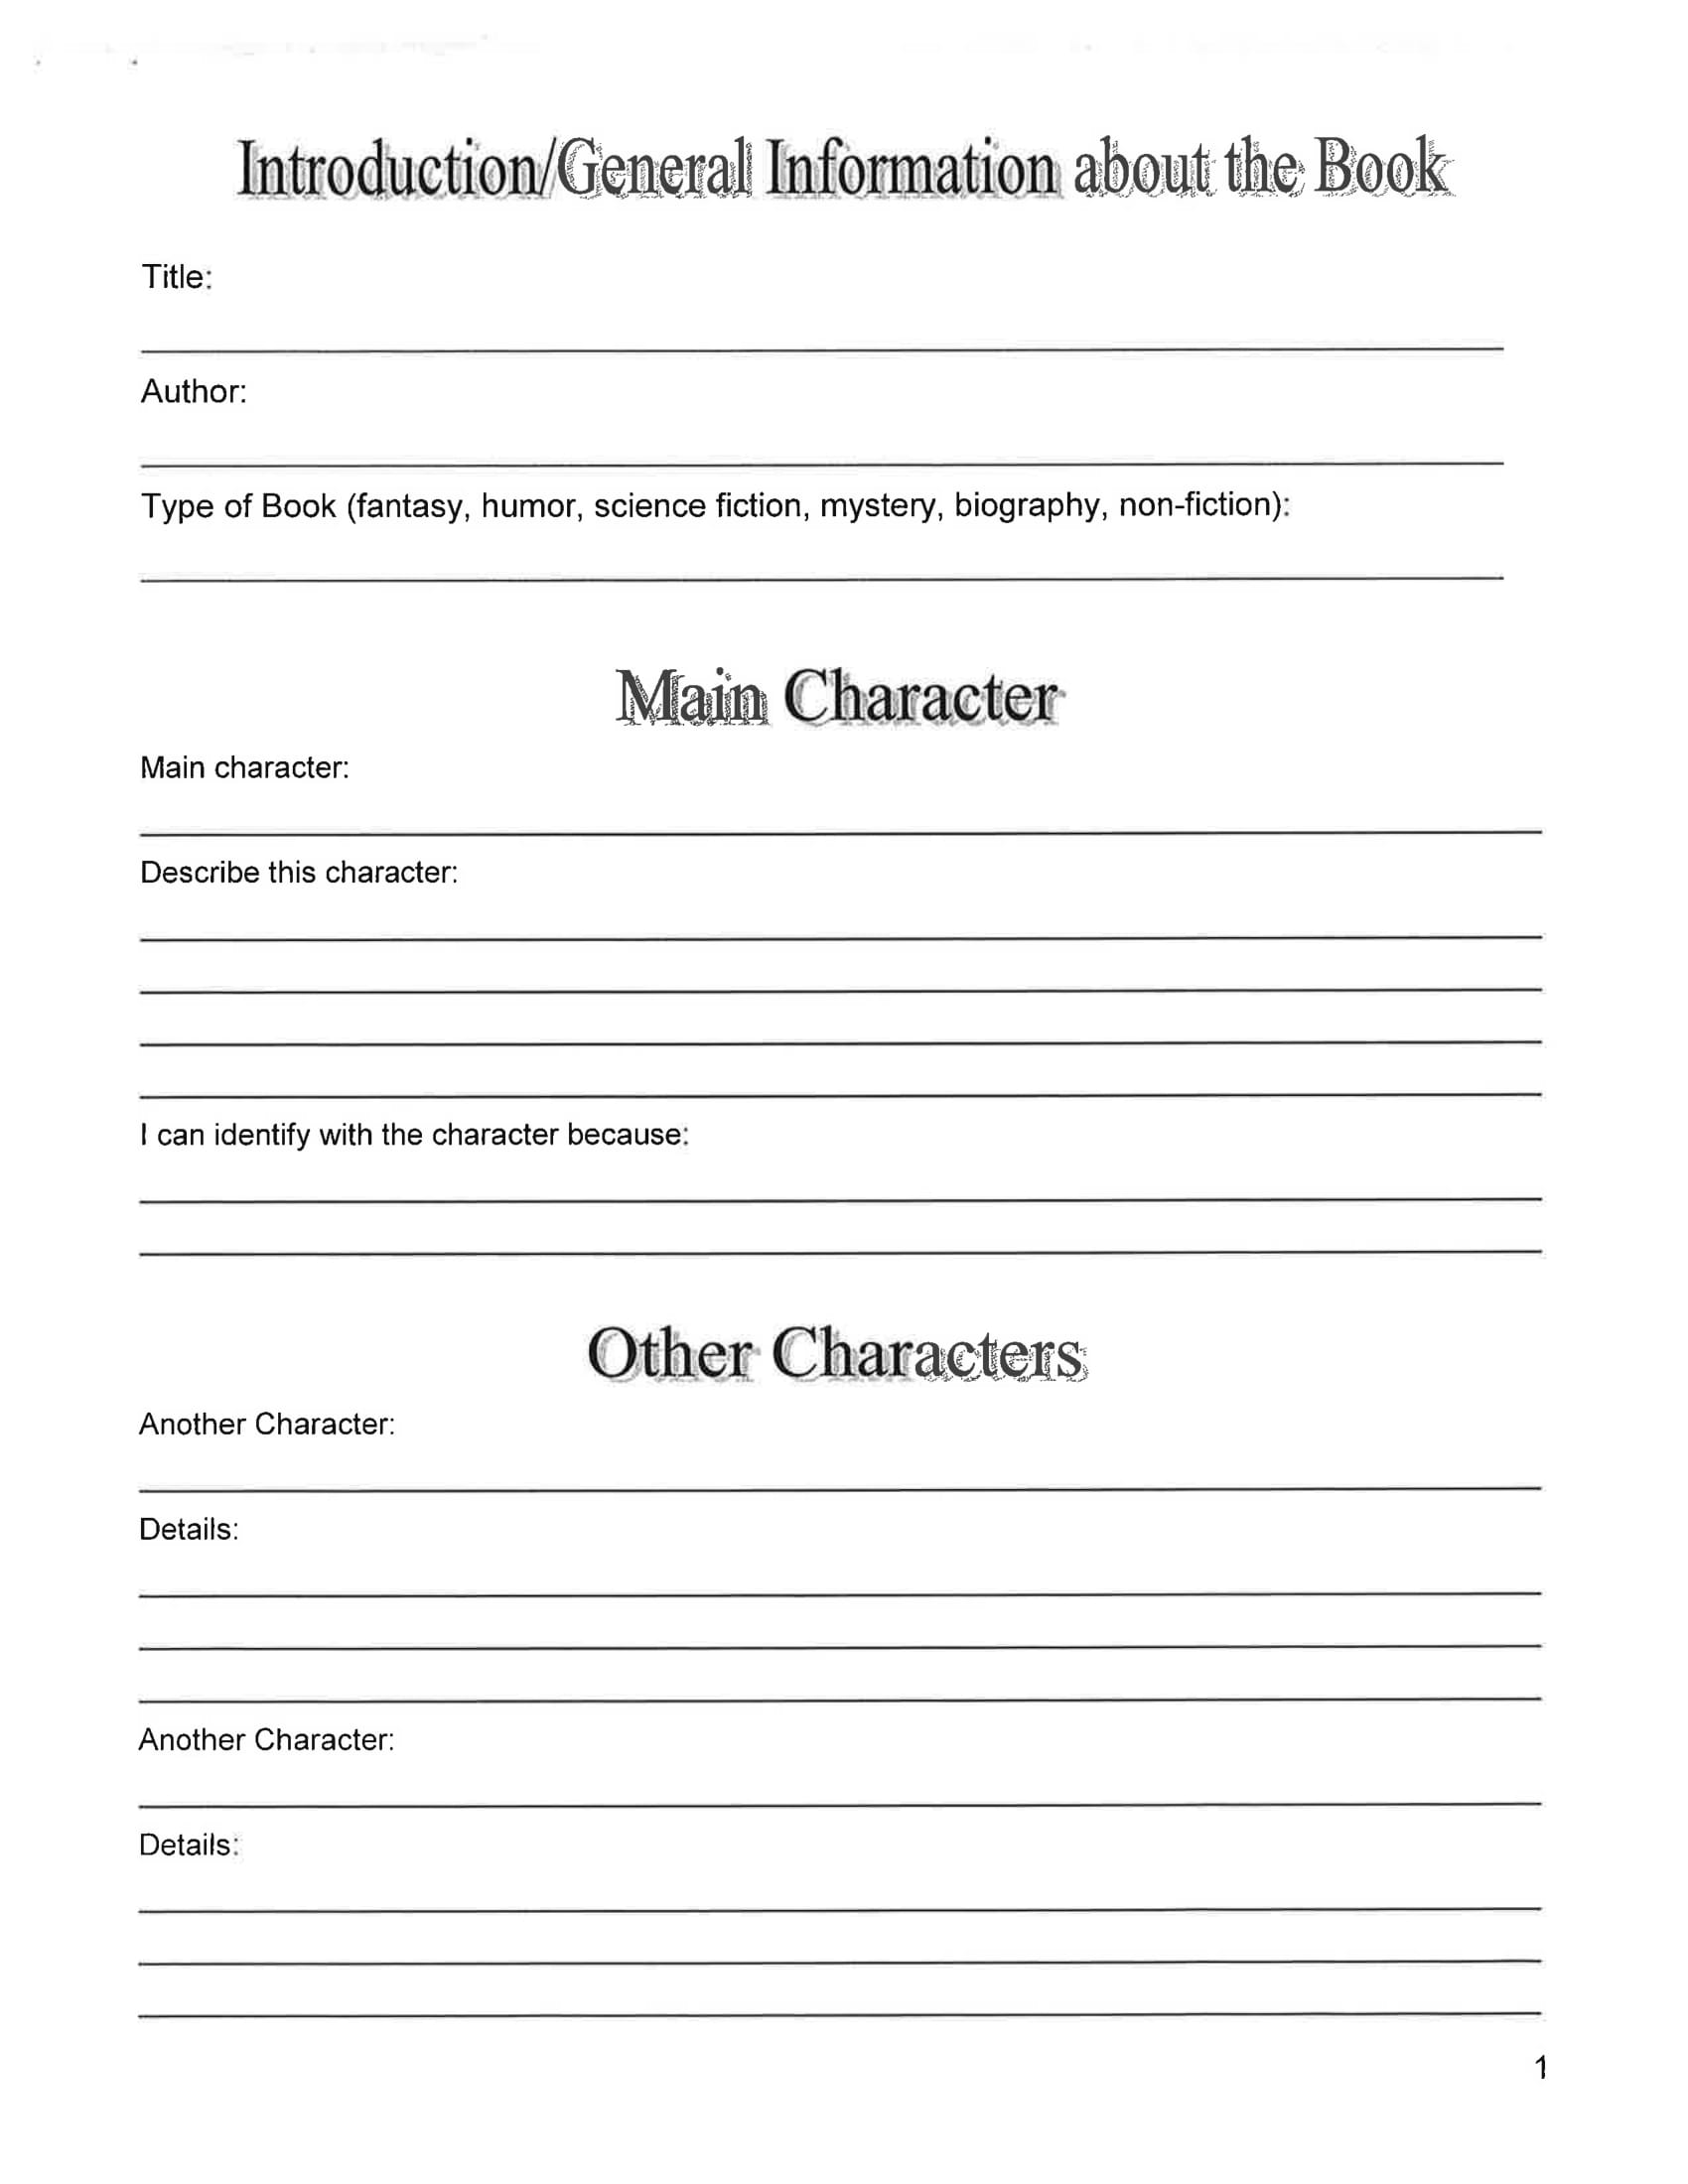 middle school book evaluation form 2